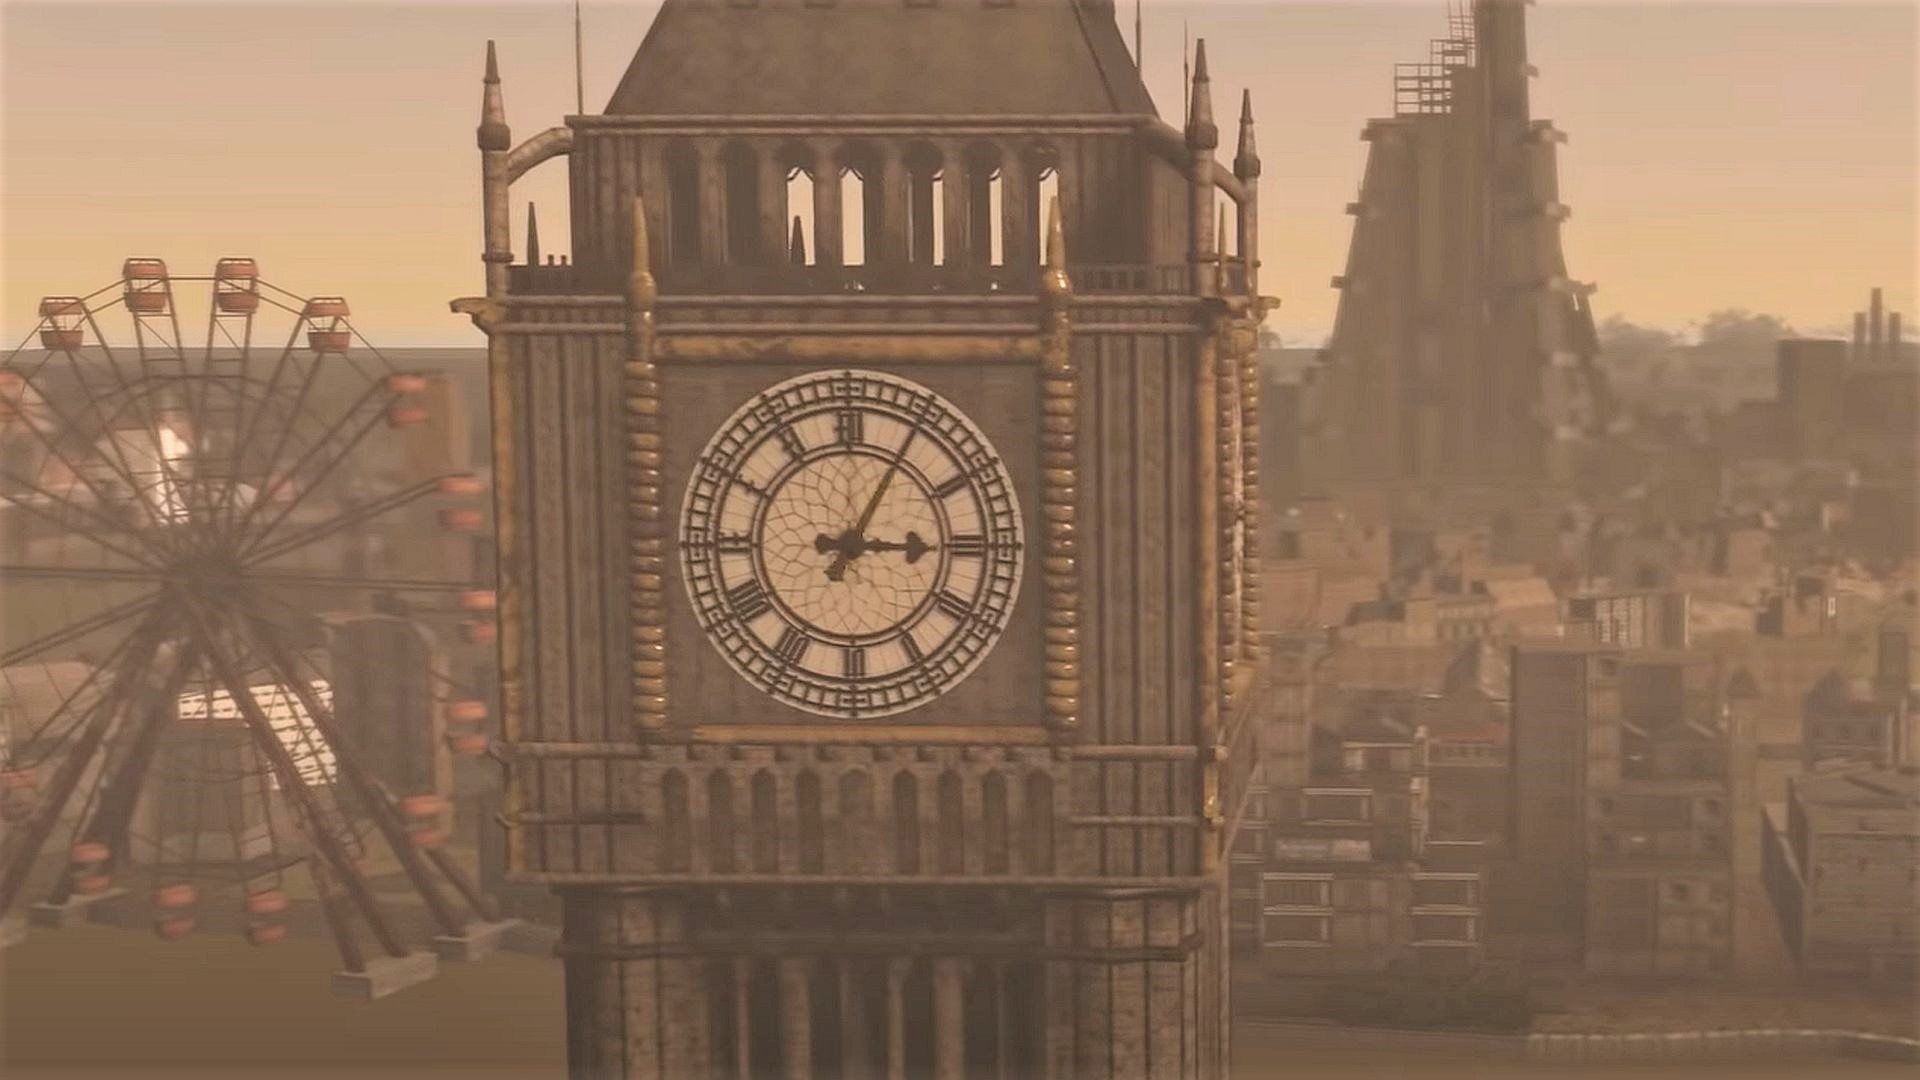 Fallout: London modders reveal a load of new content for the huge Fallout 4 mod